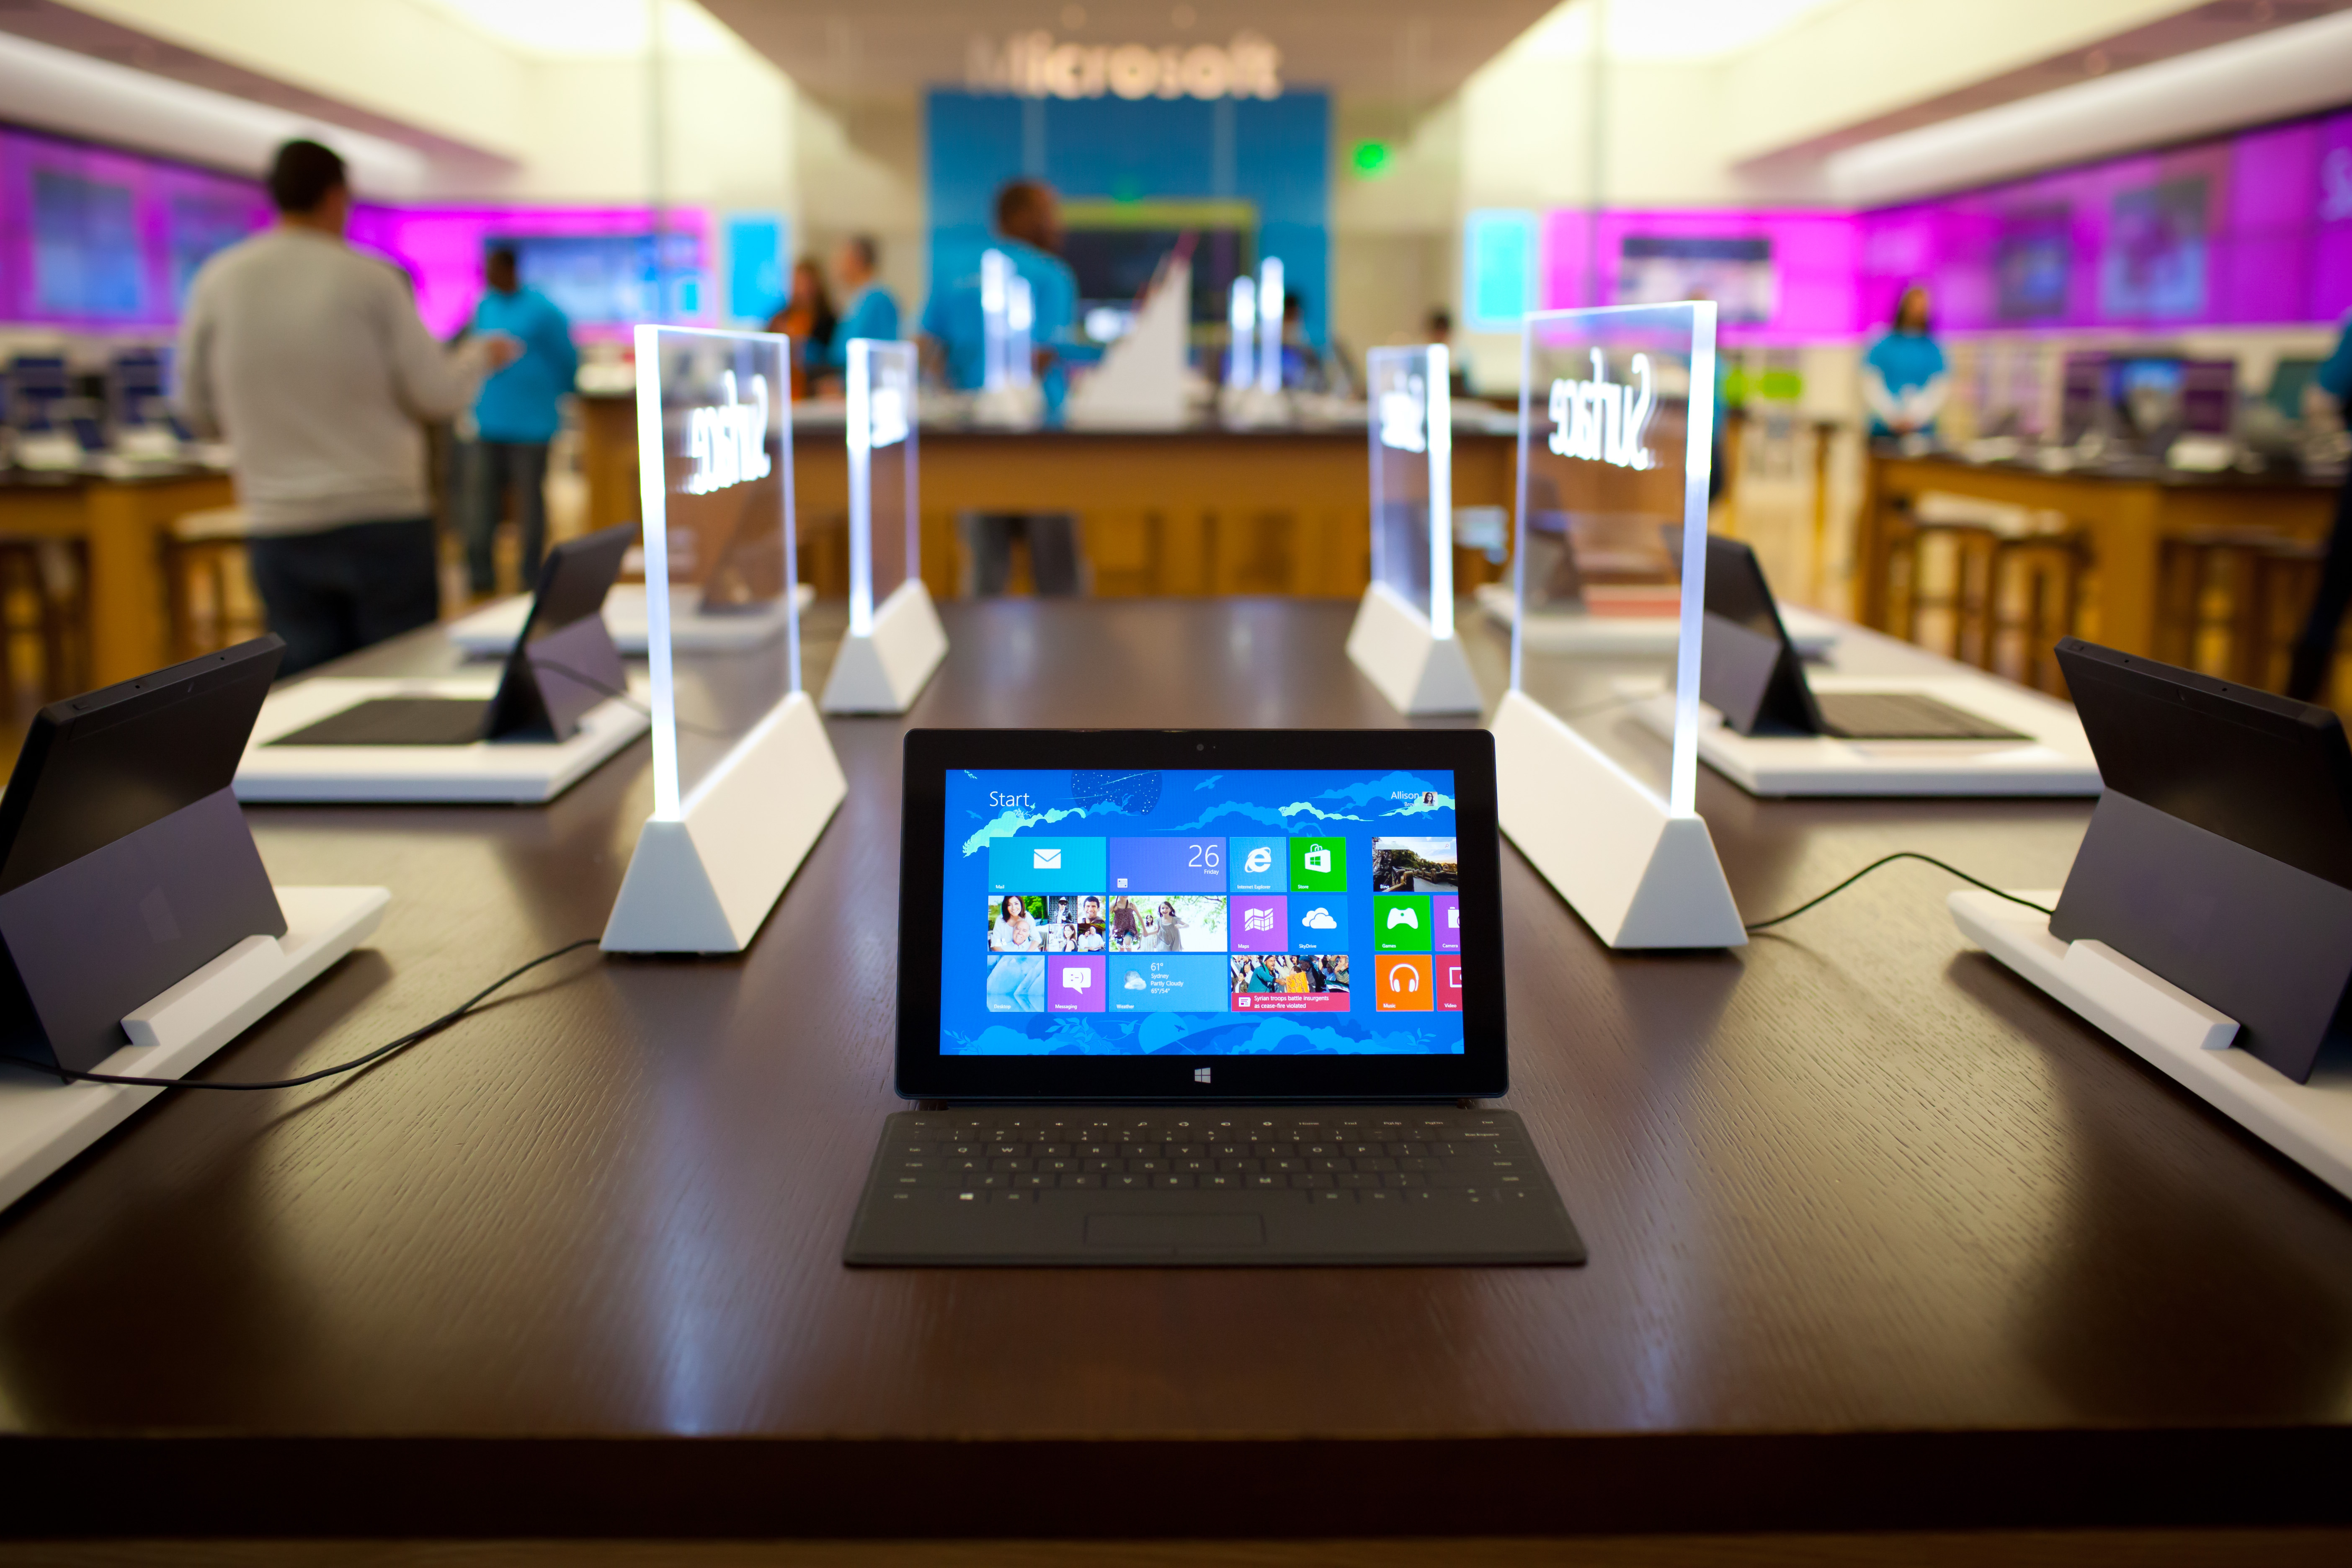 Microsoft Microsofts network of stores will continue to exist